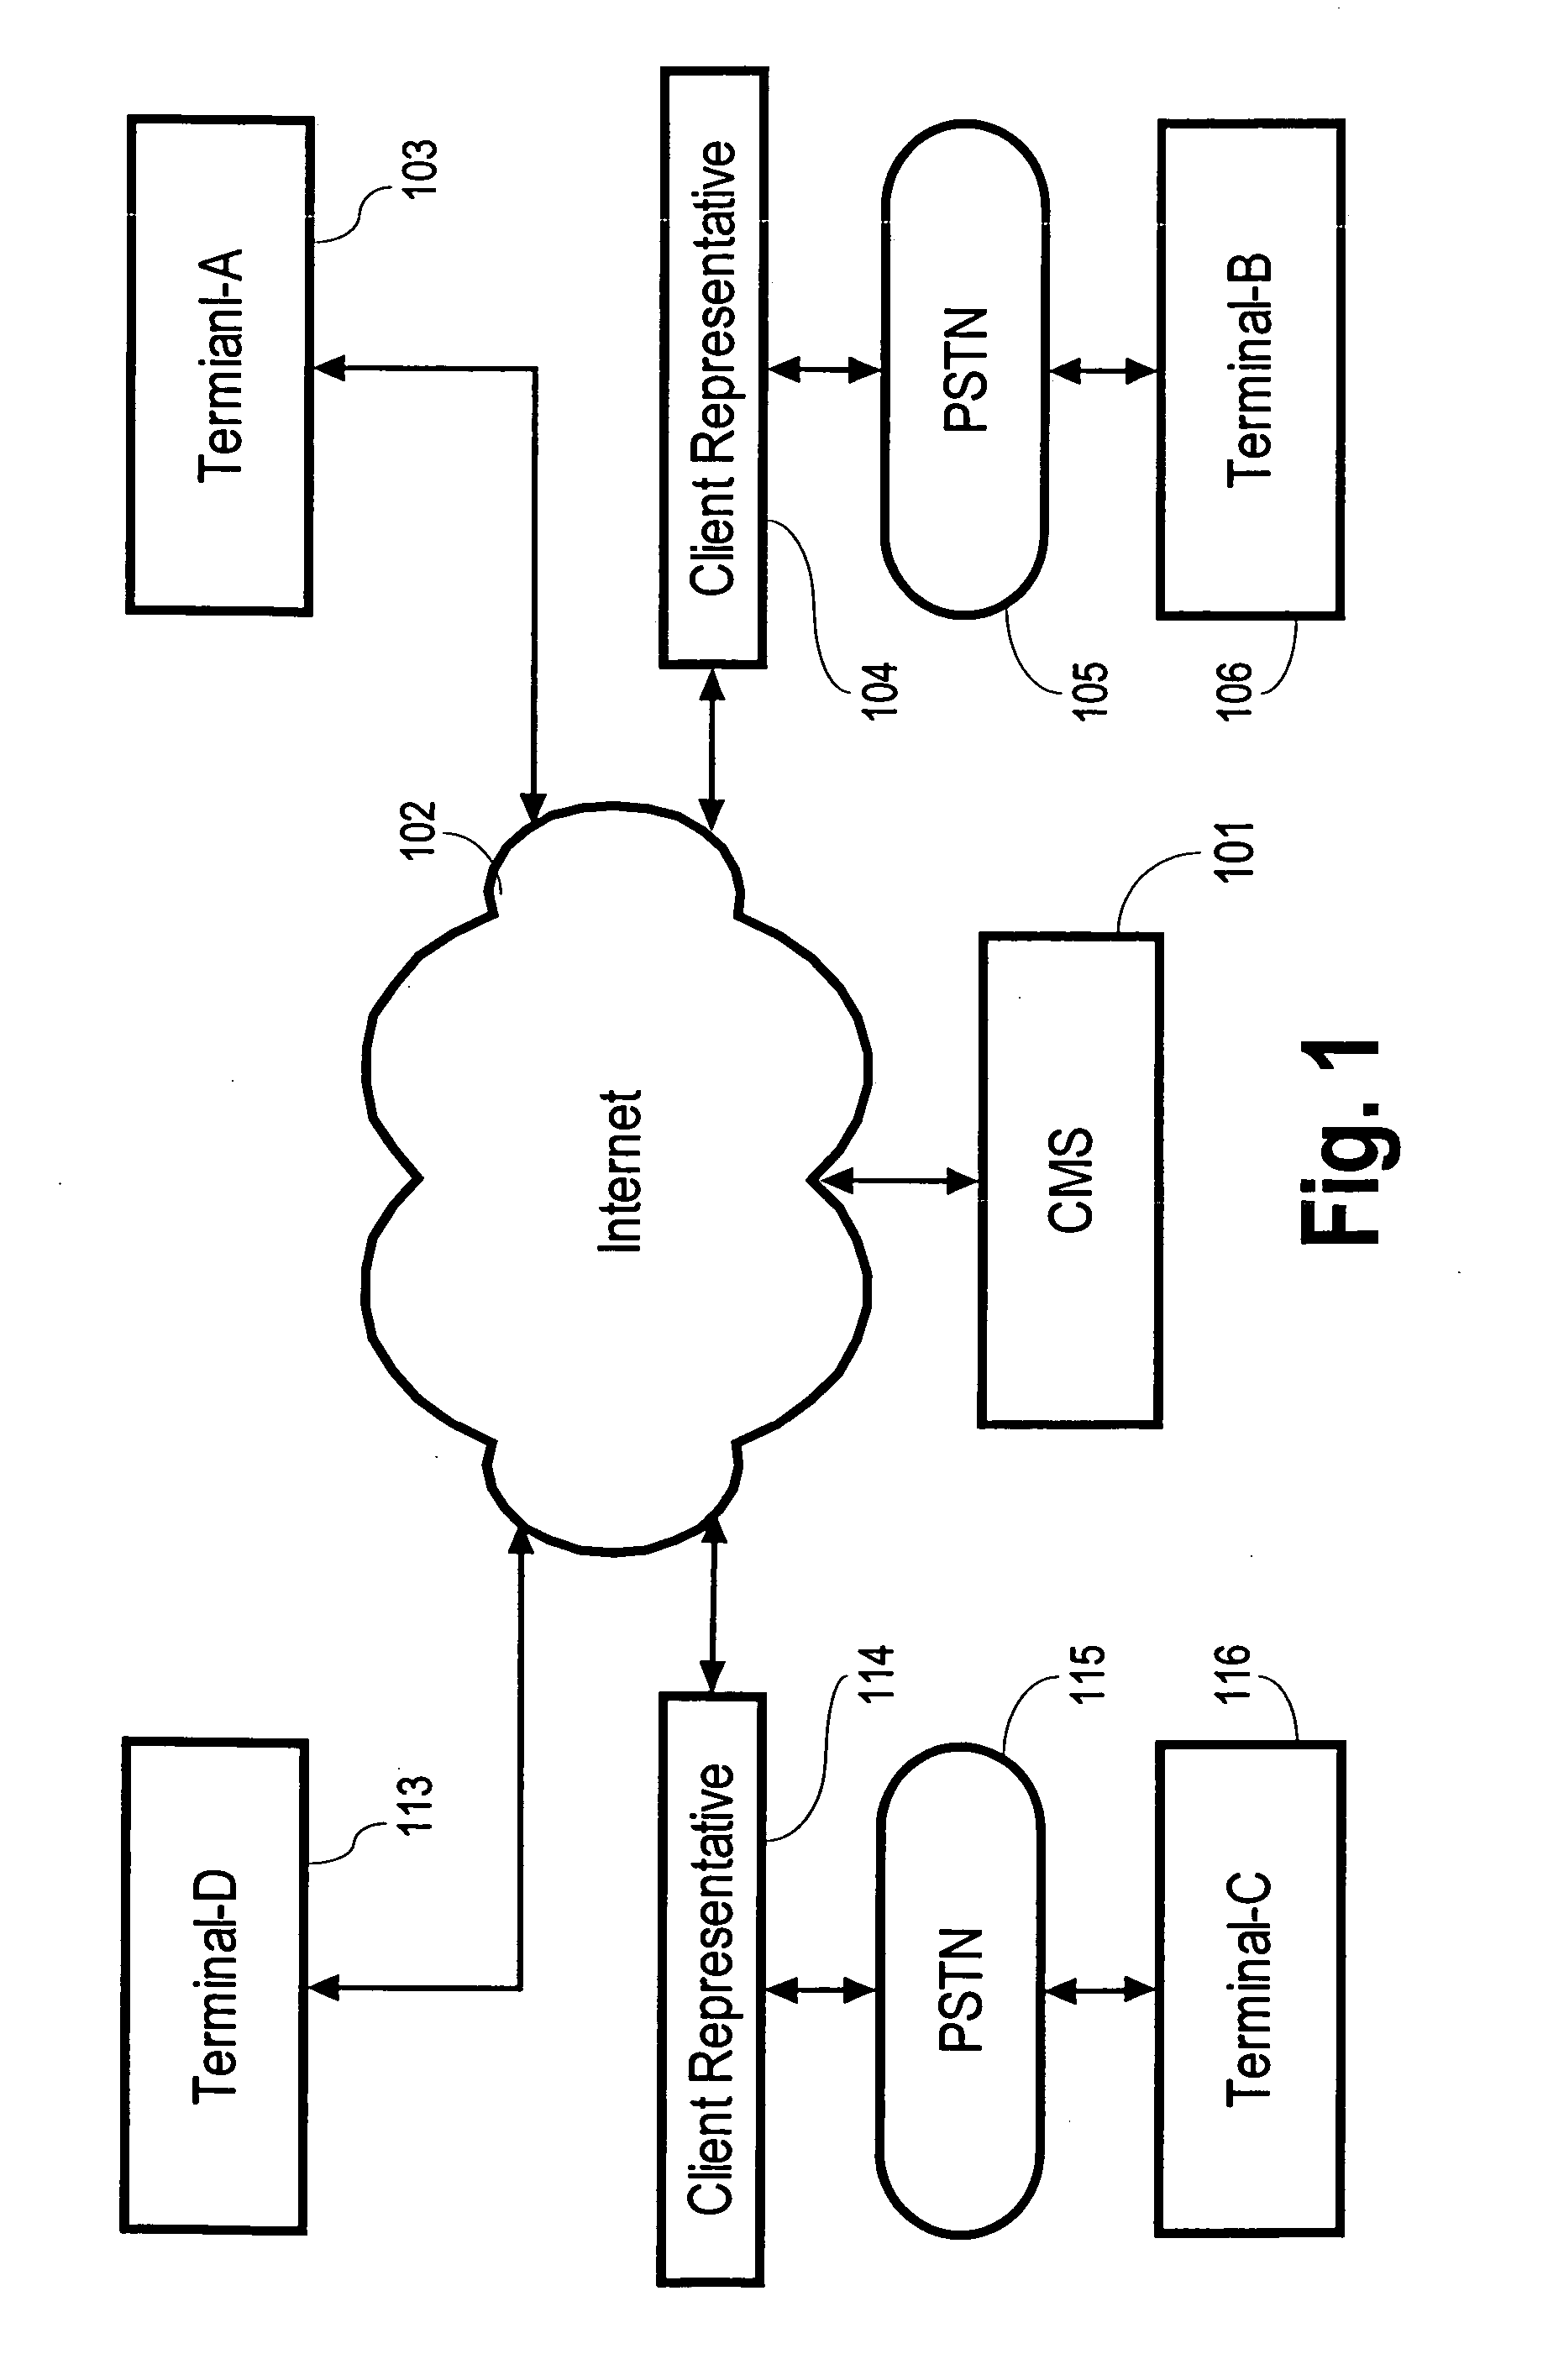 System of providing communication service via client representatives and the method of the same